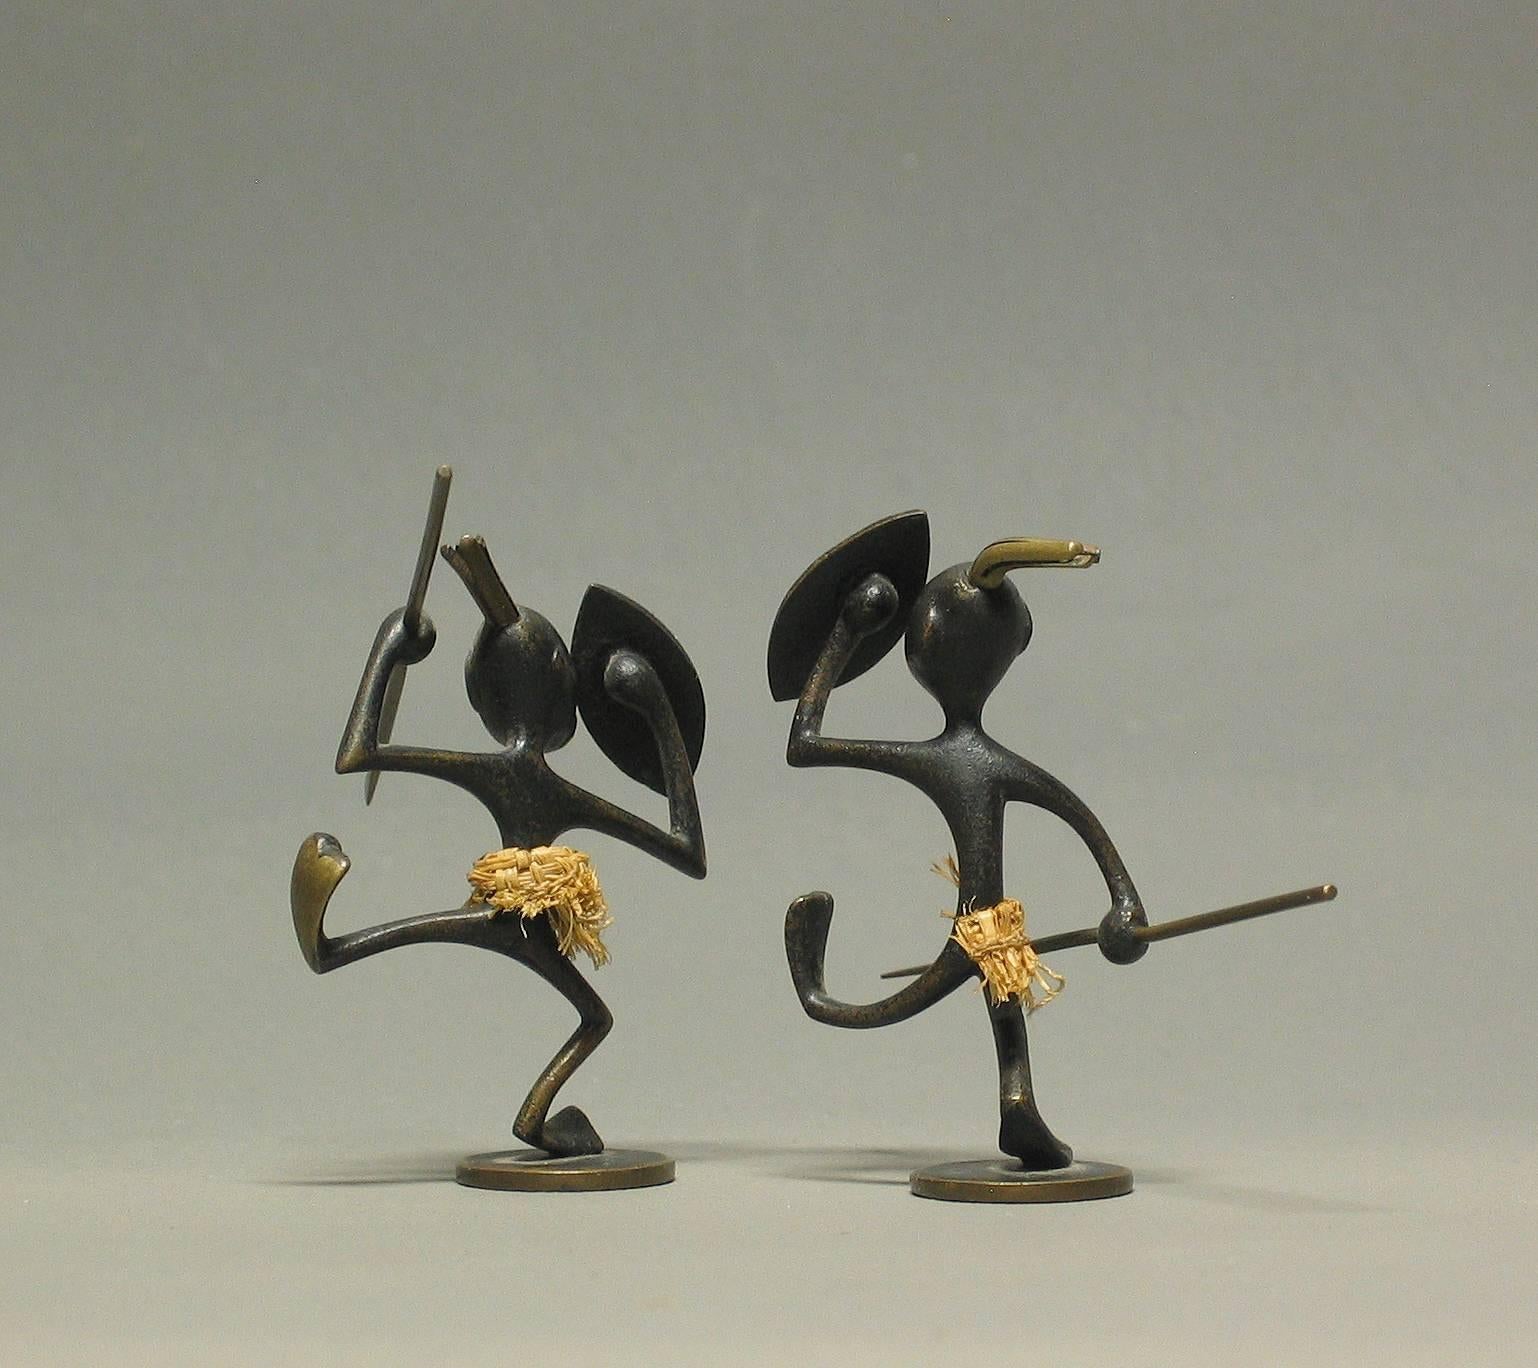 Hand-Crafted Pair of Patinated Bronze African Figures by Hagenauer, circa 1930s-1950s